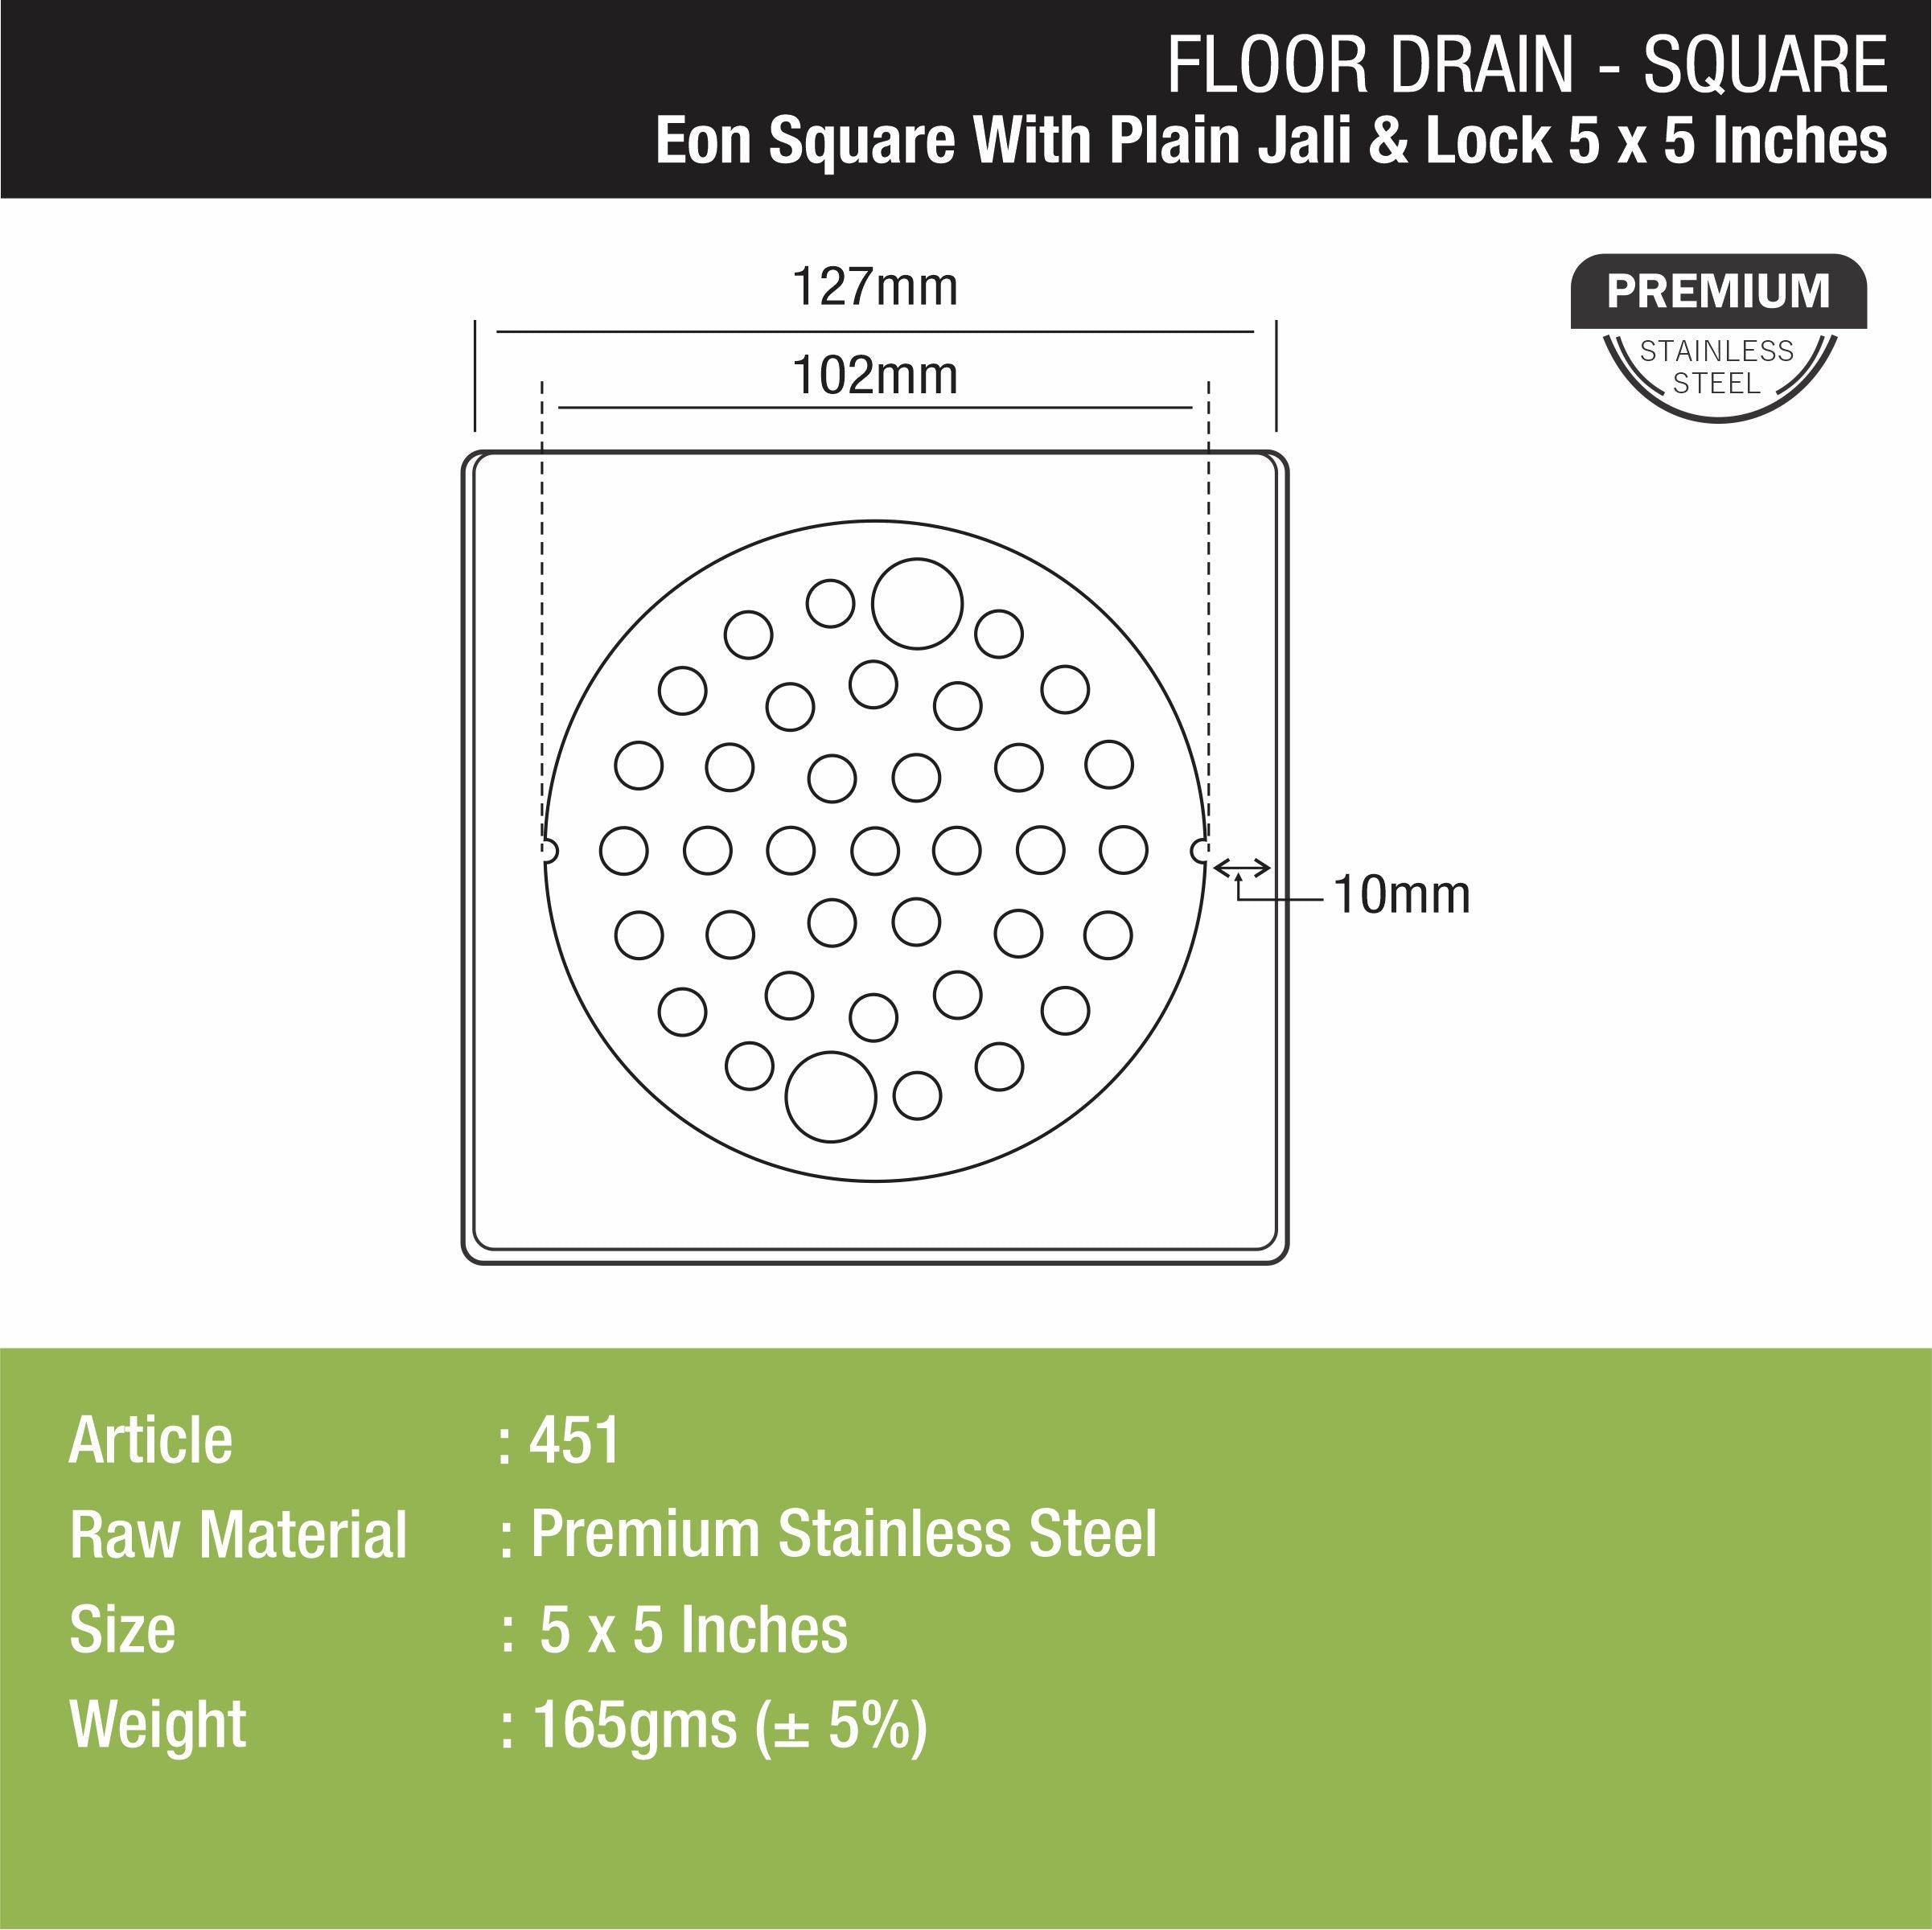 Eon Square Floor Drain with Plain Jali and Lock (5 x 5 Inches) - LIPKA